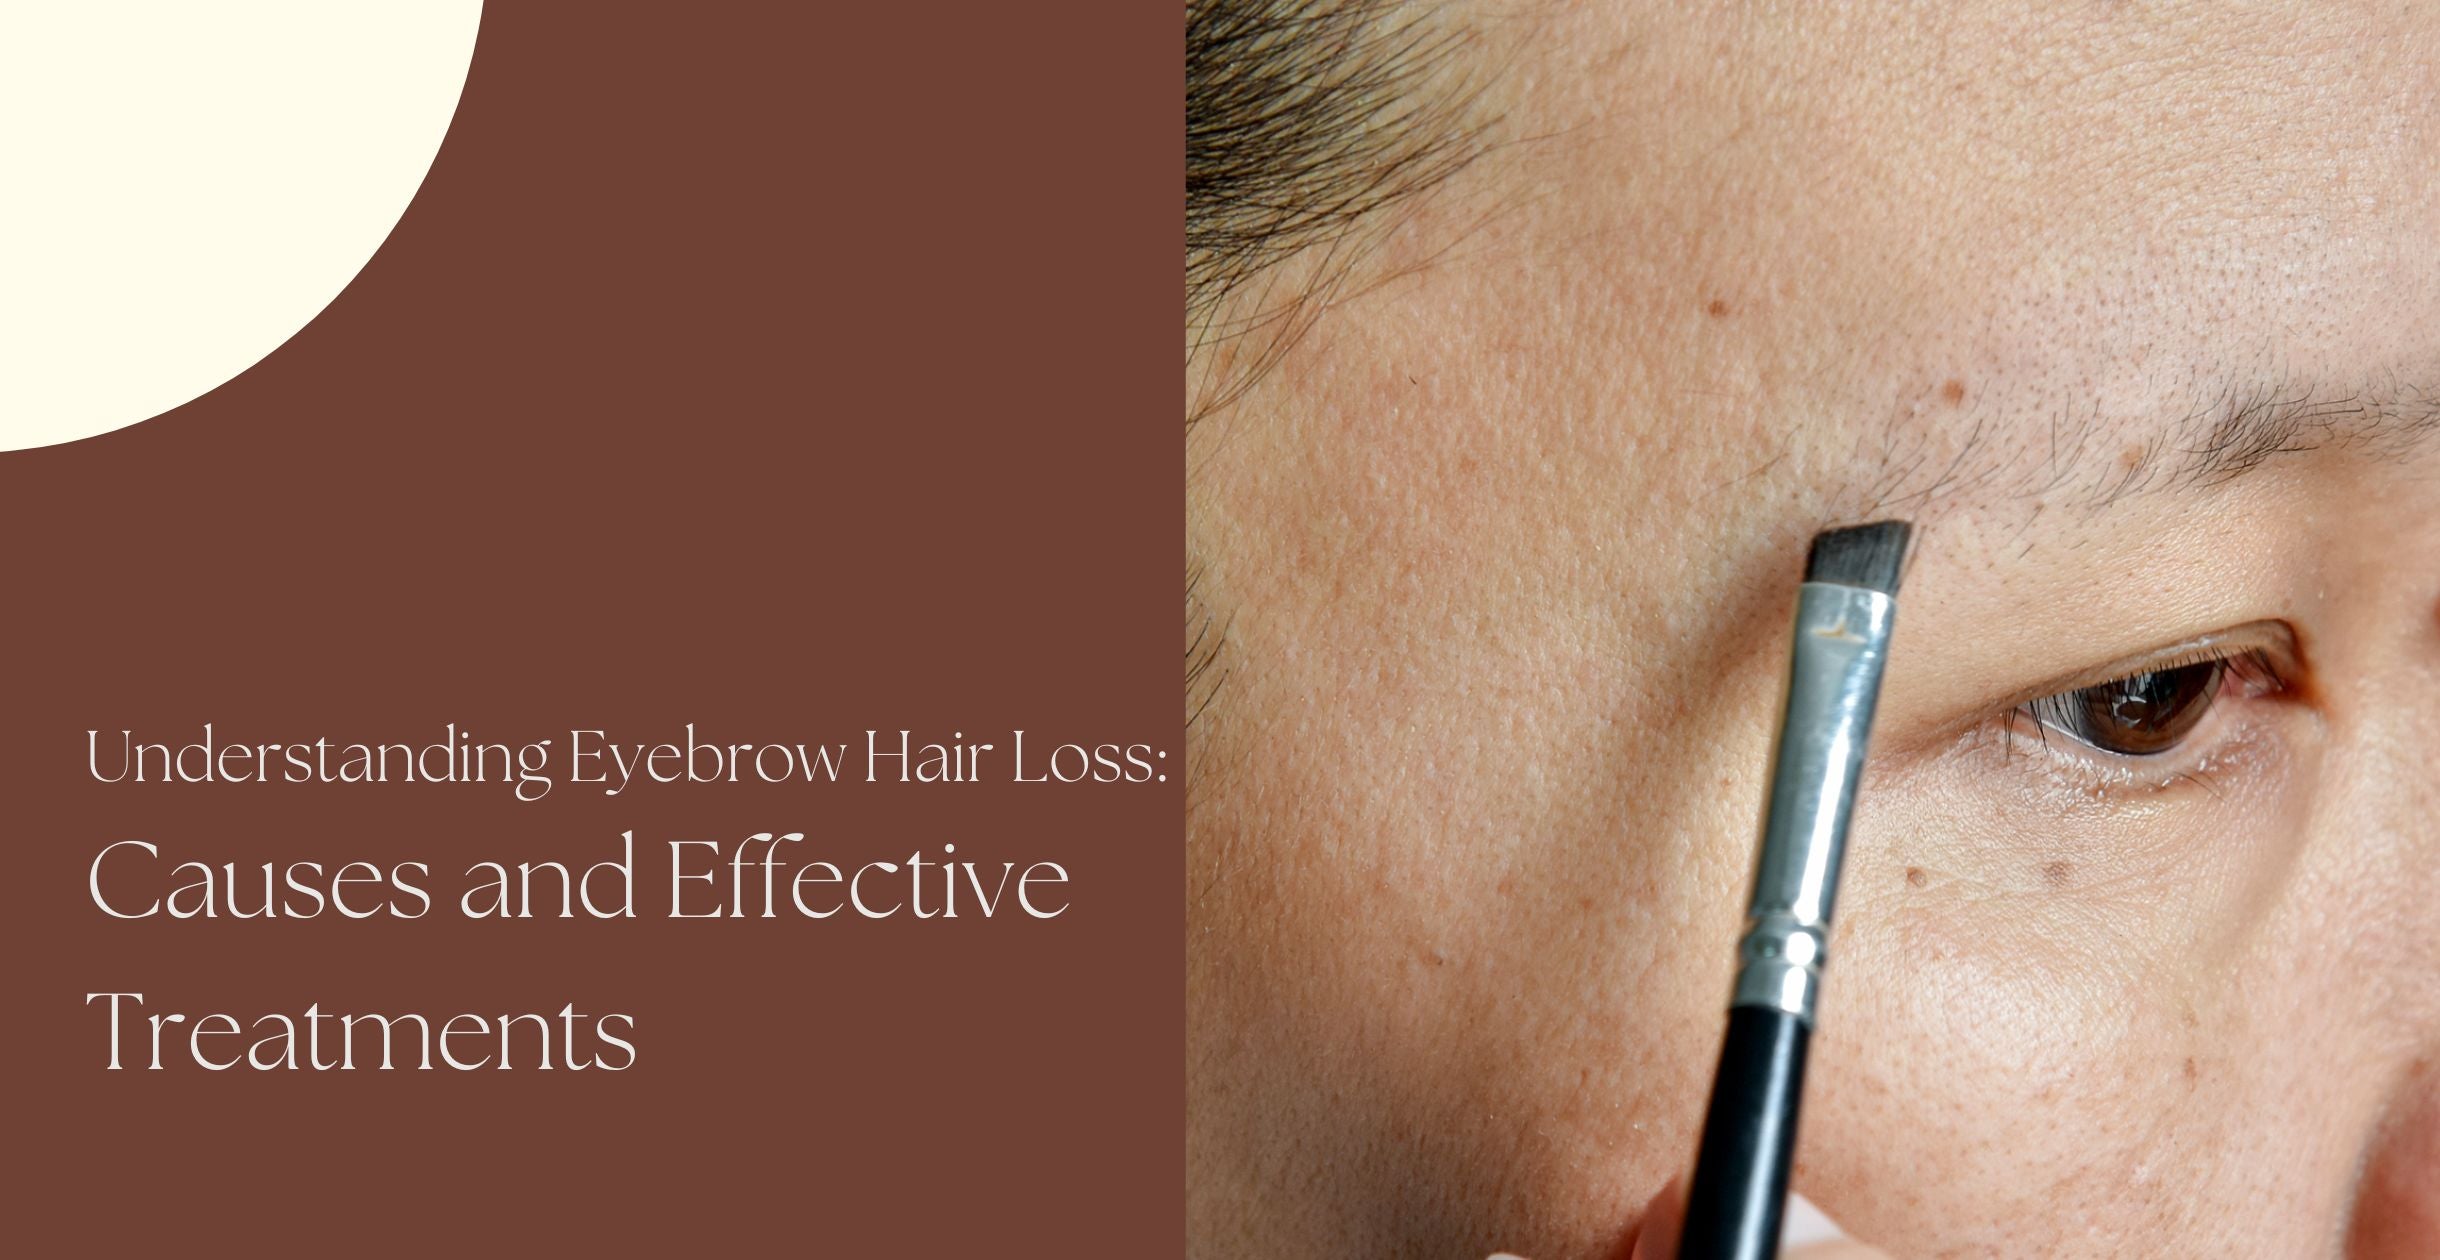 Understanding Eyebrow Hair Loss: Causes and Effective Treatments